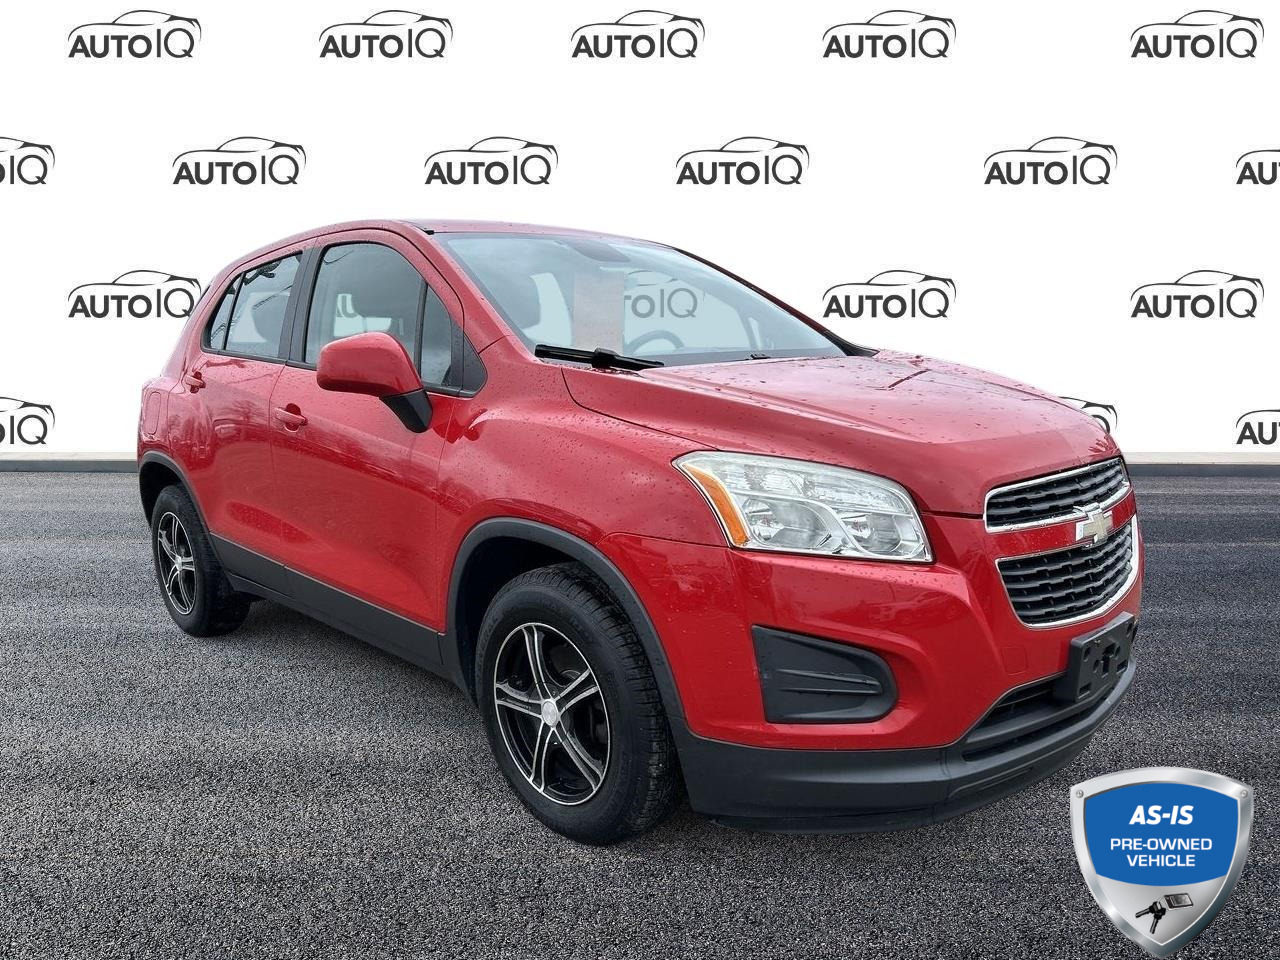 2014 Chevrolet Trax LS AS TRADED - YOU CERTIFY YOU SAVE